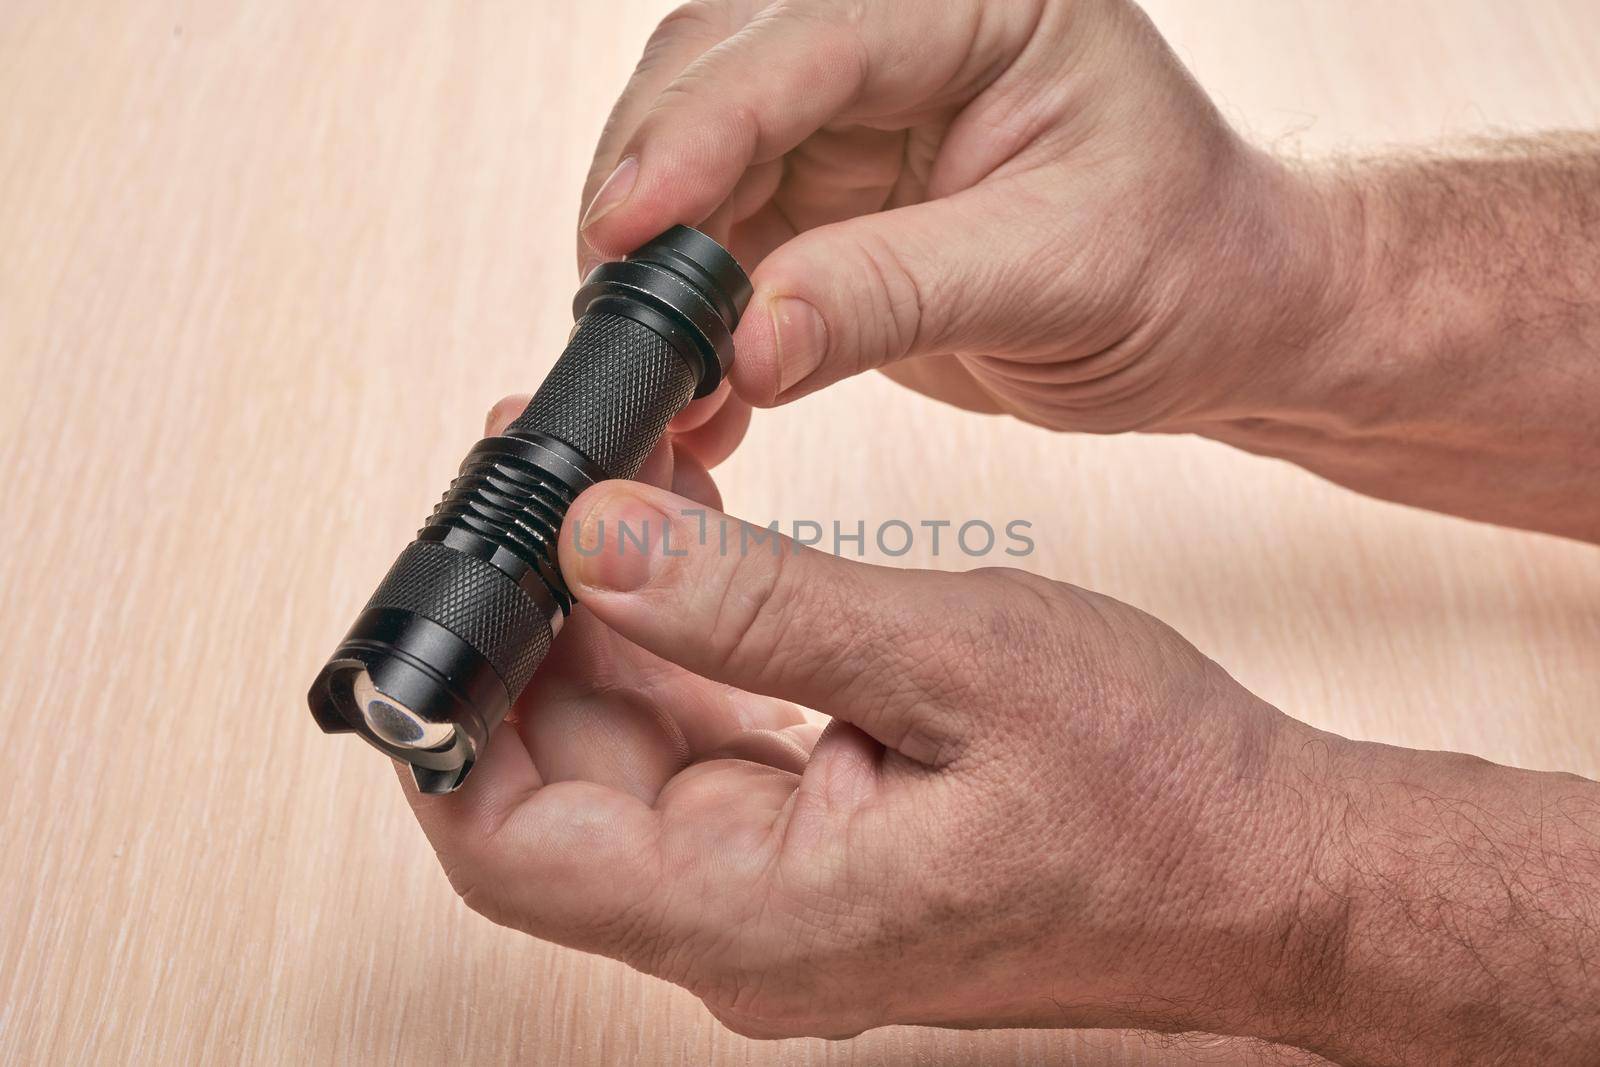 Hands hold a small black flashlight to replace the used battery by vizland